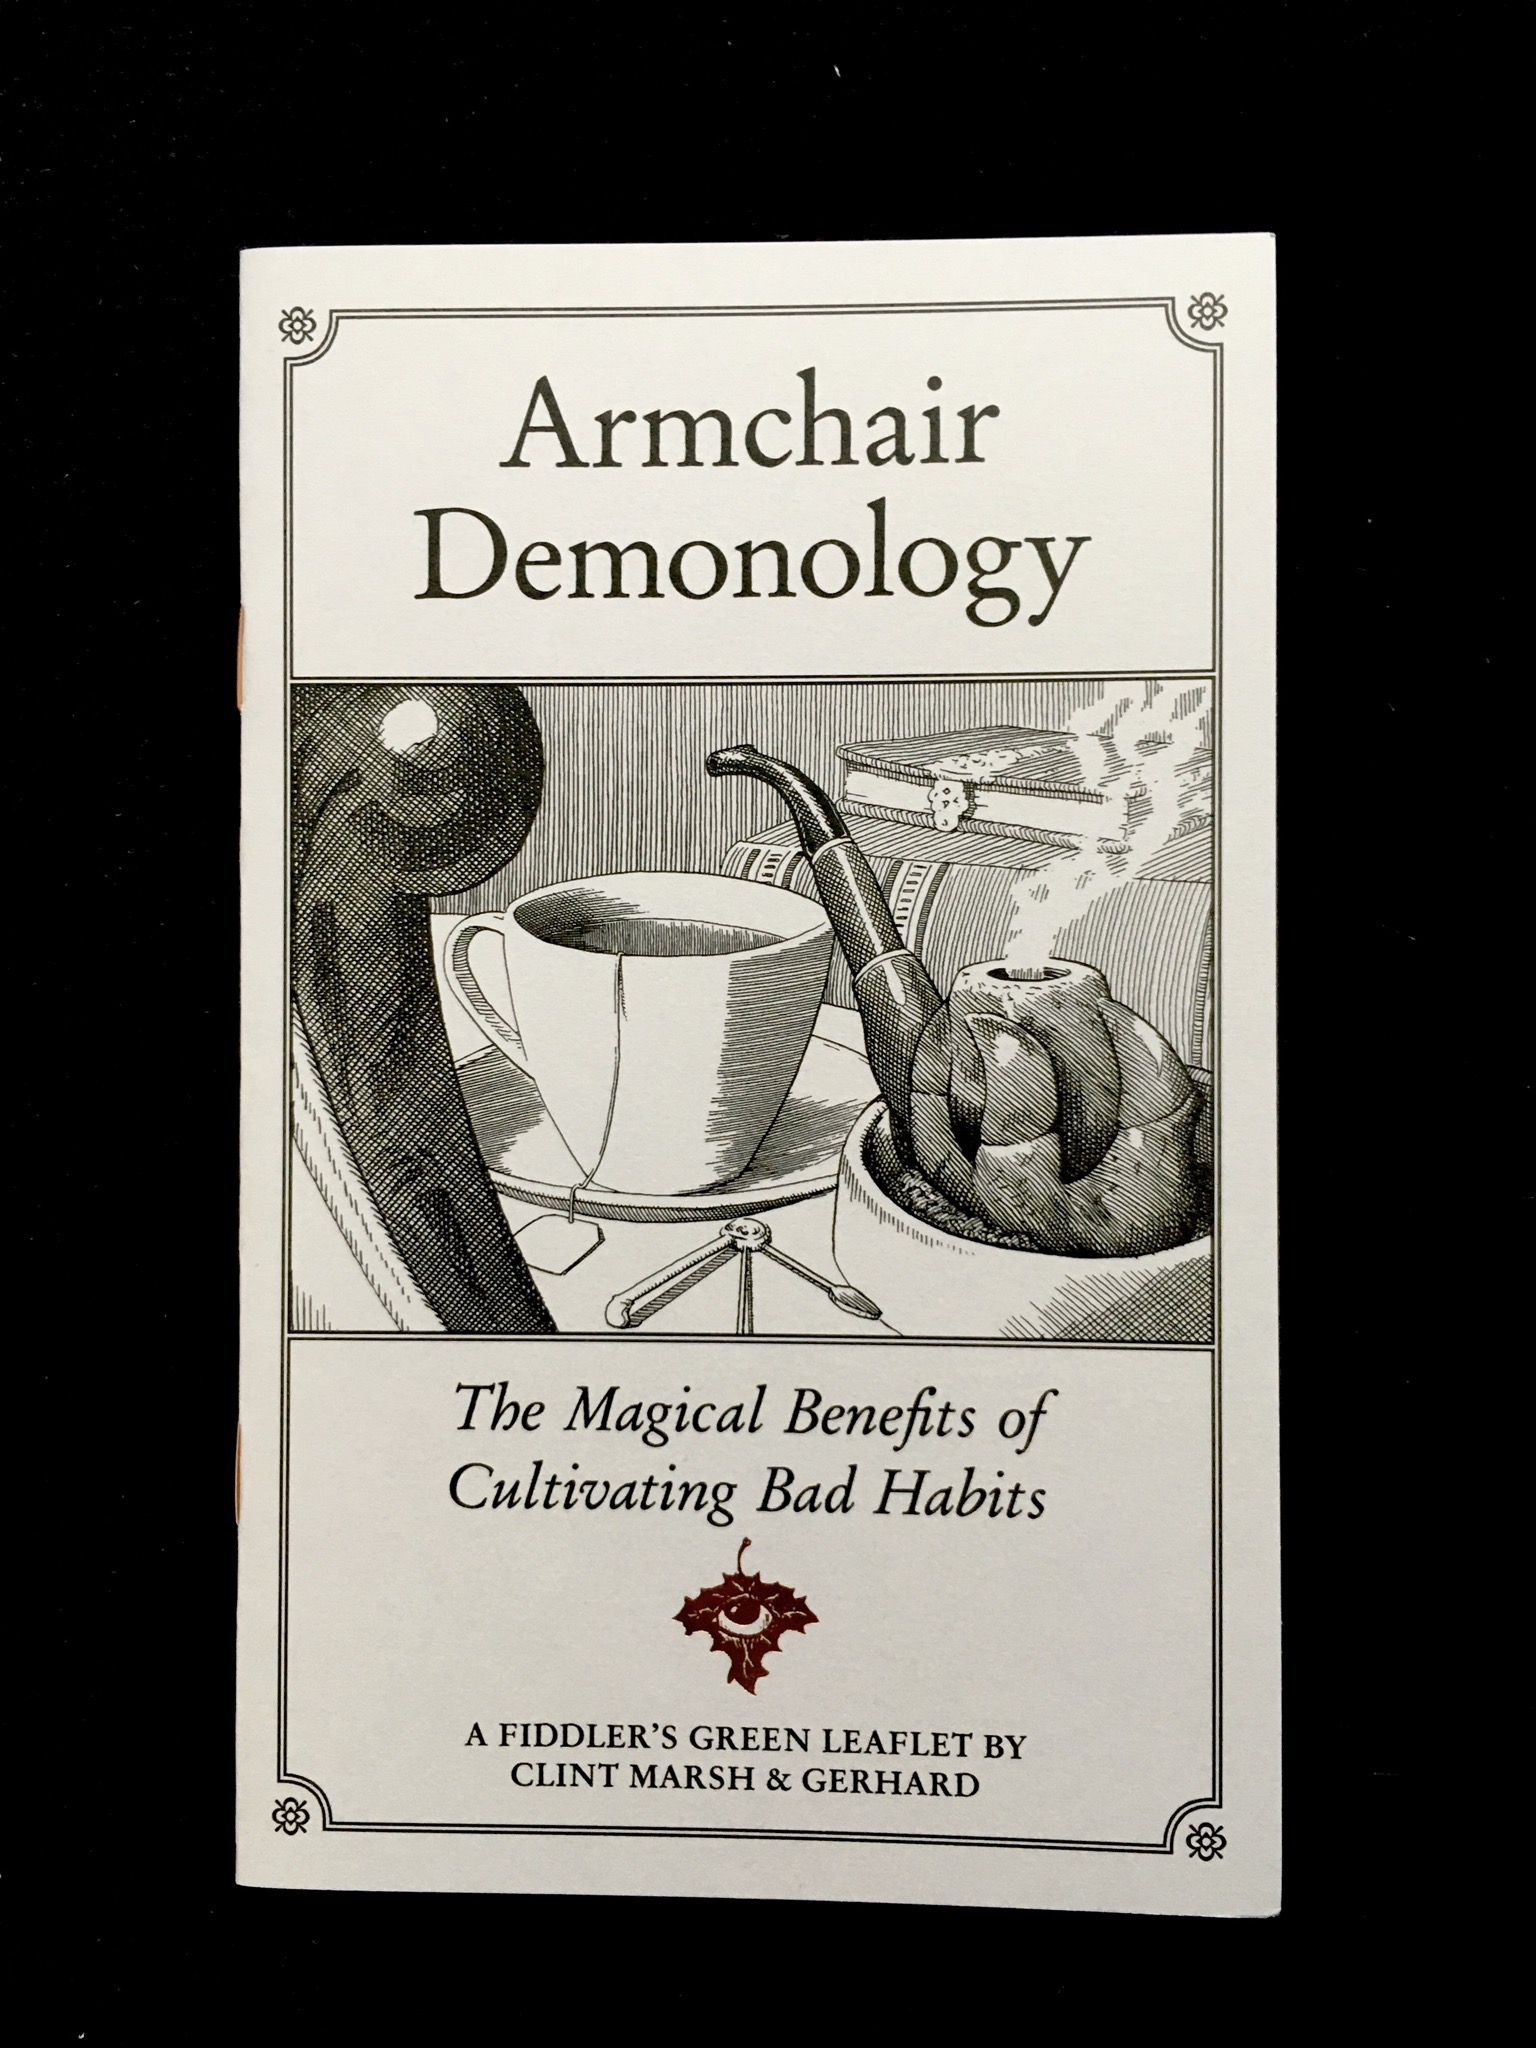 Armchair Demonology: The Magical Benefits of Cultivating Bad Habits by Clint Marsh & Gerhard